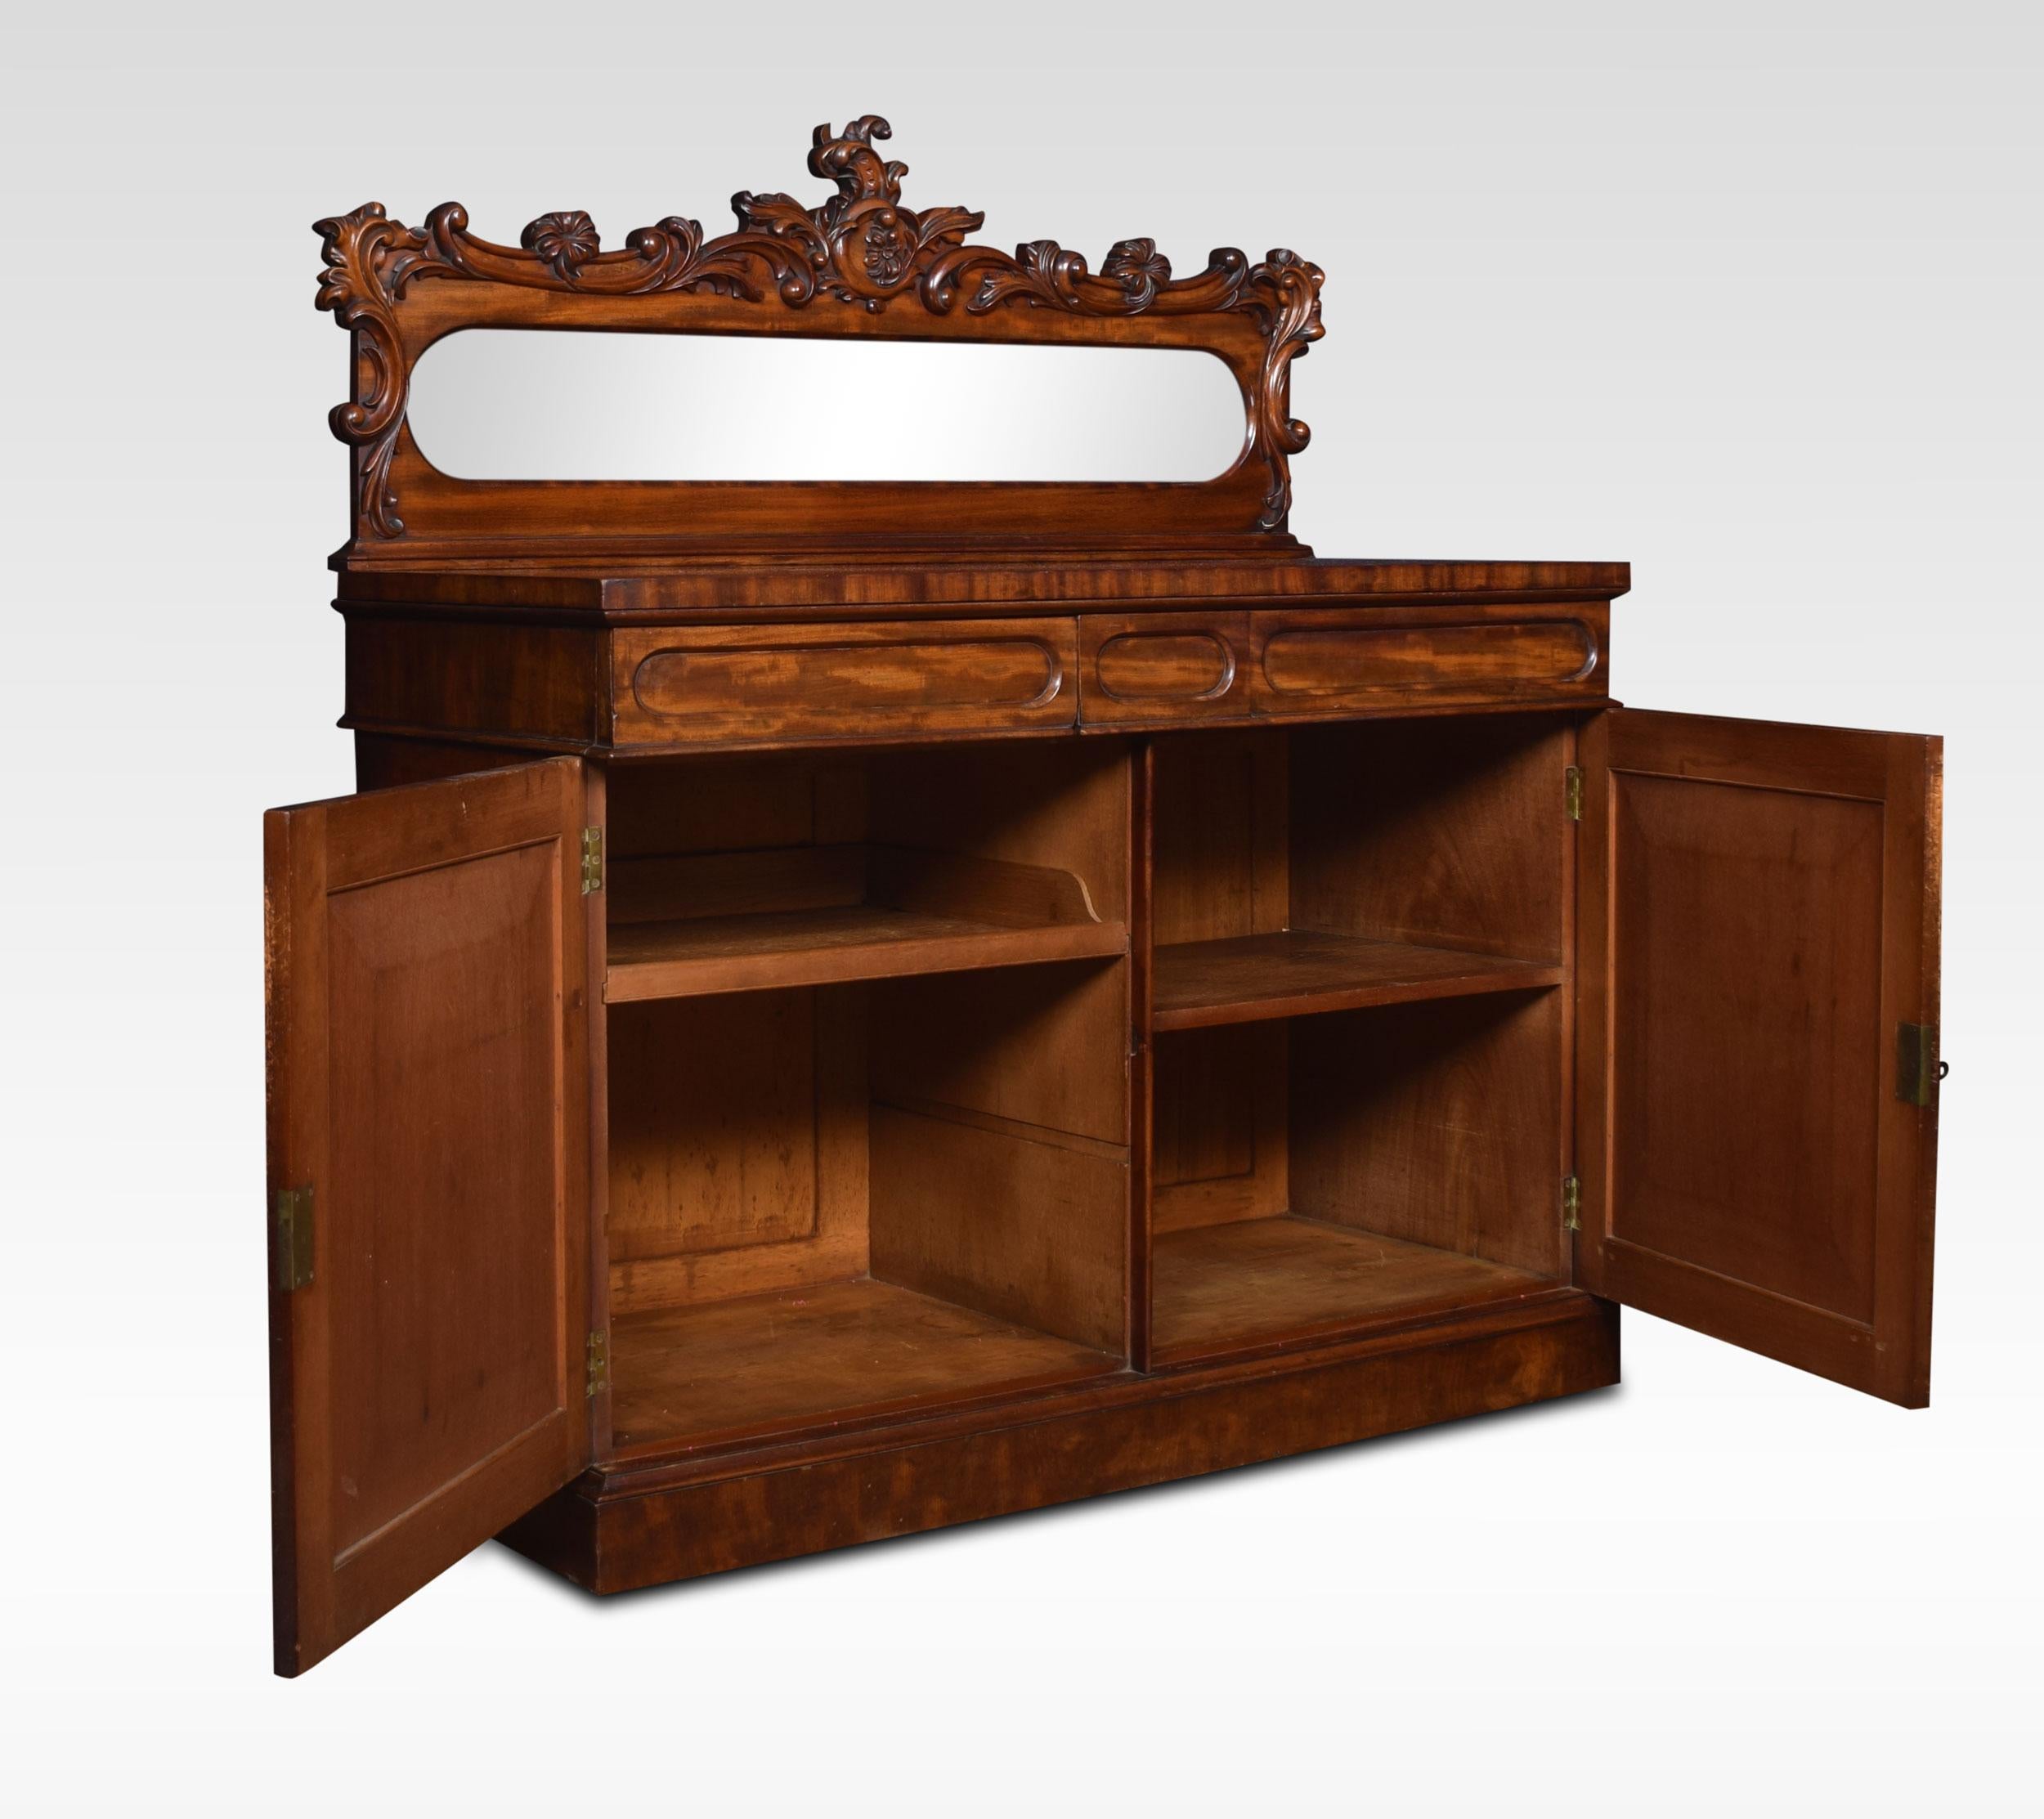 William IV Mahogany Chiffonier In Good Condition For Sale In Cheshire, GB